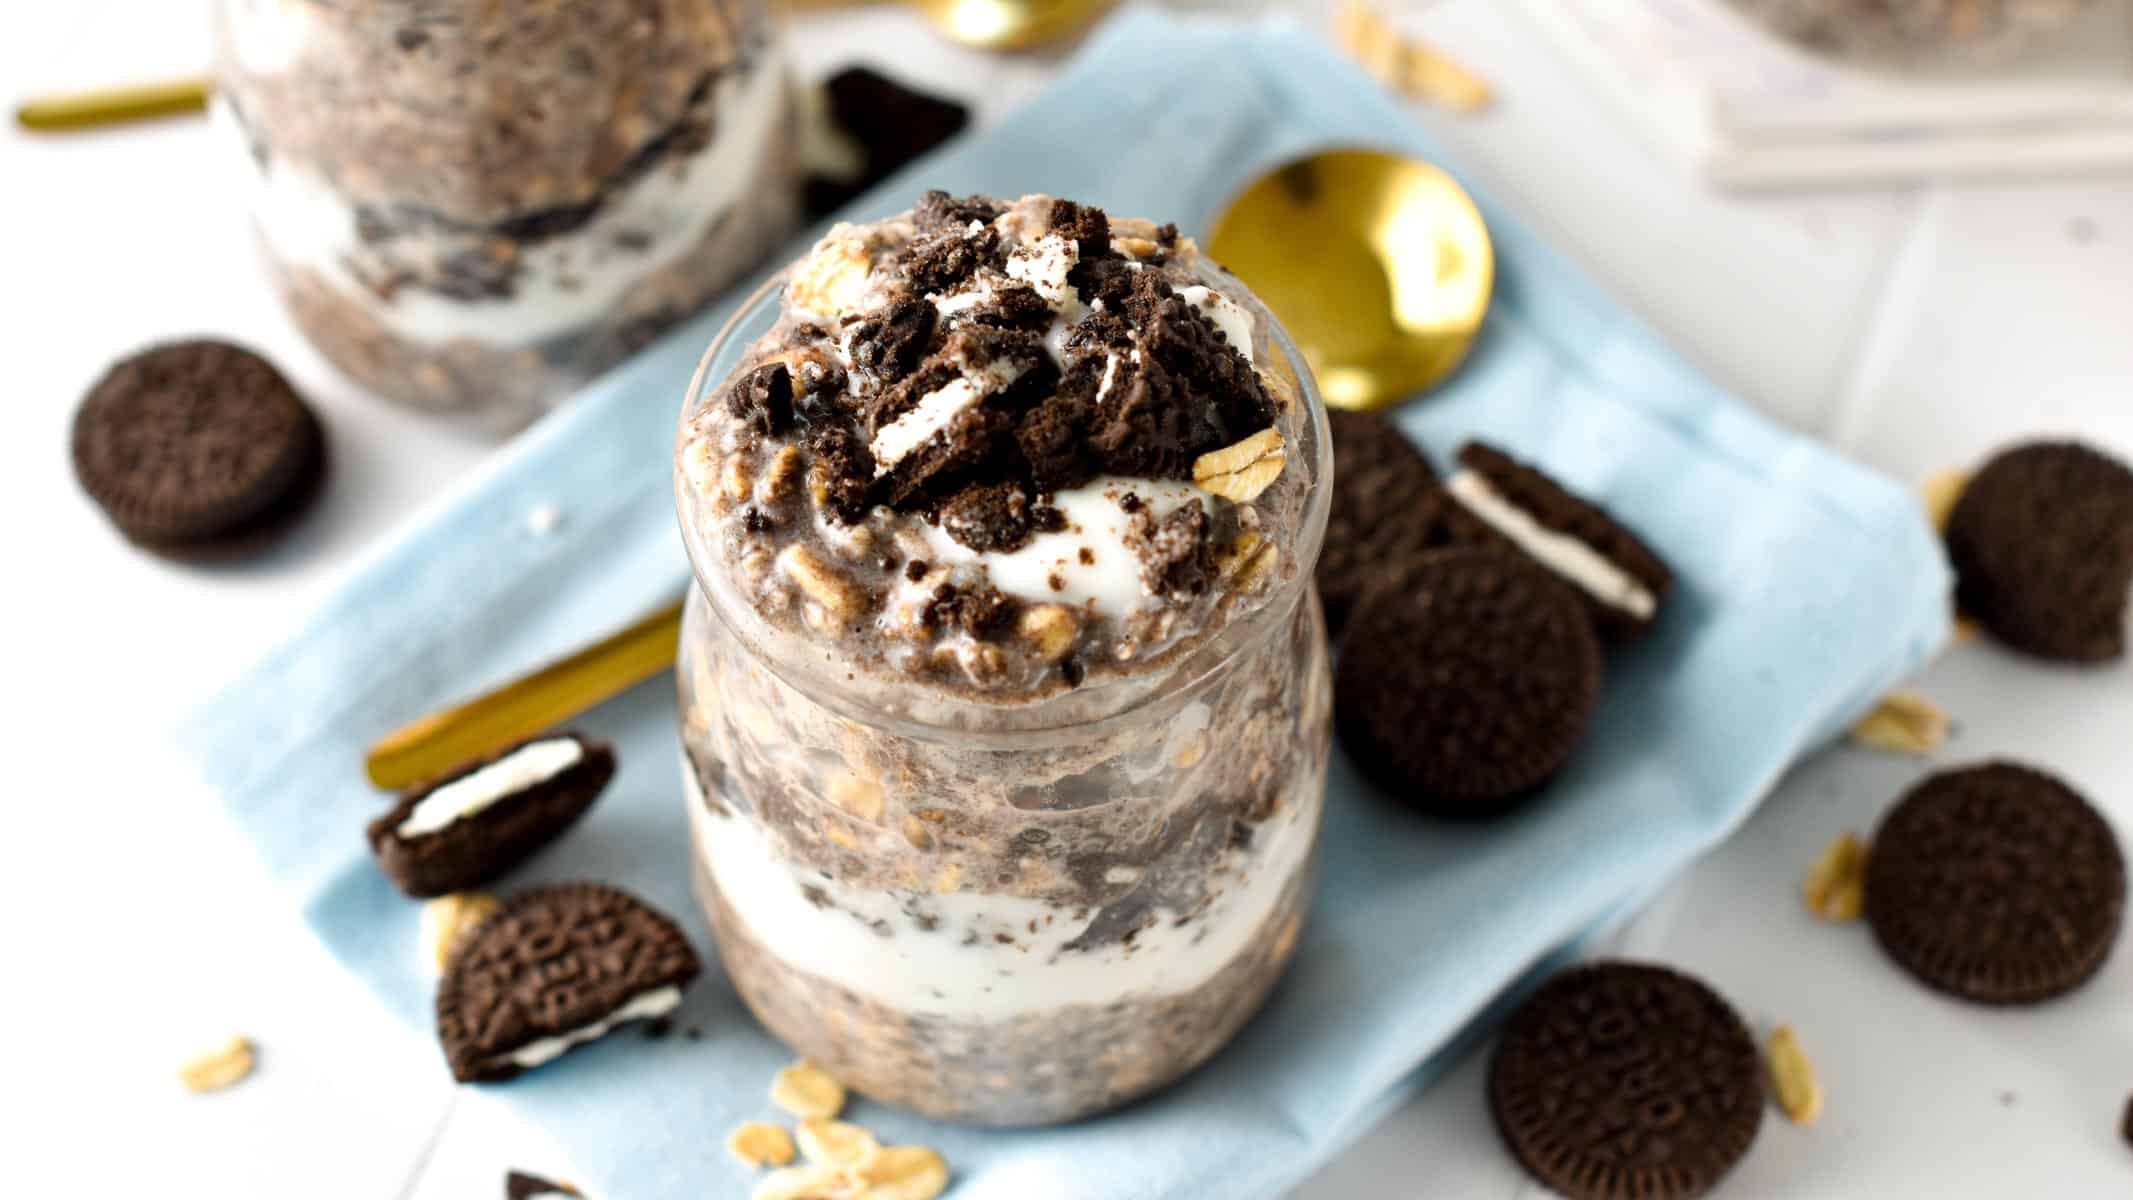 This Oreo Overnight Oats recipe is like having dessert for breakfast! It has all the healthy ingredients from the classic overnight oats recipe with a touch of Oreo cookies, just for fun and flavor.